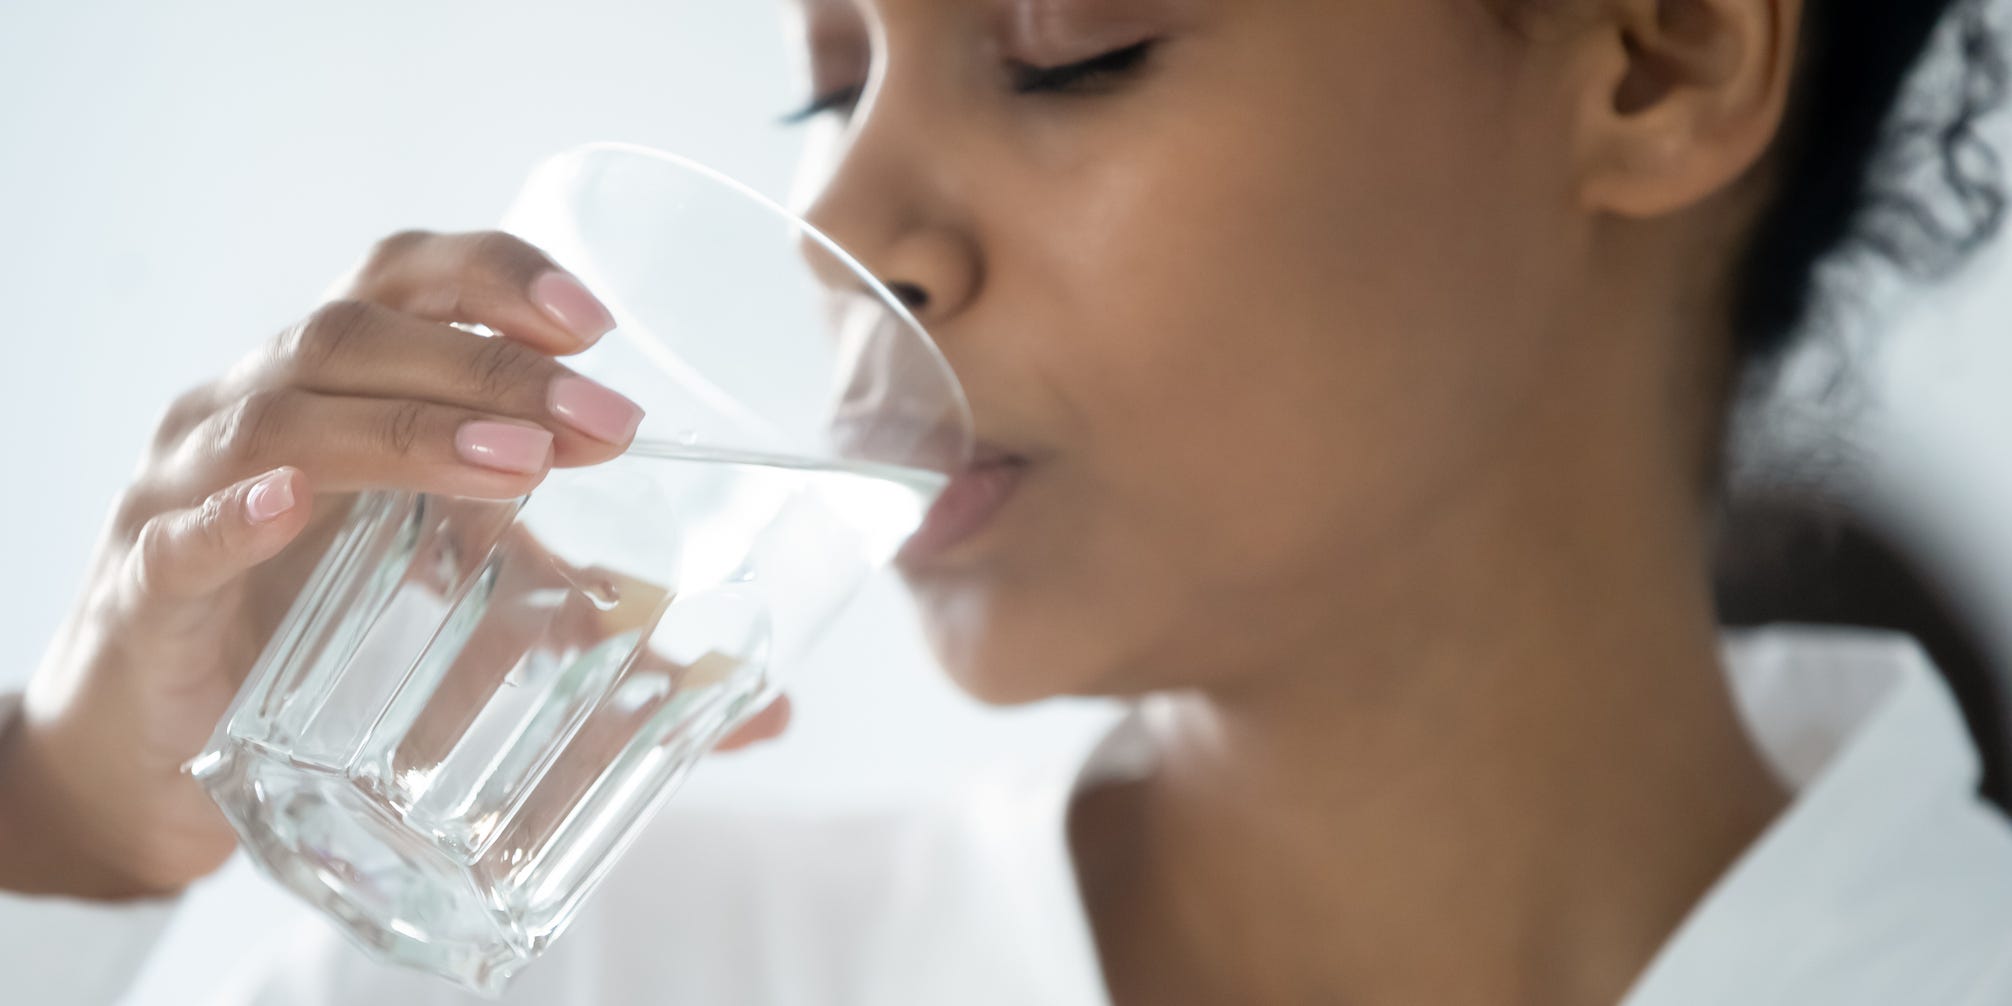 Drinking water can help flush out bacteria responsible for UTIs.